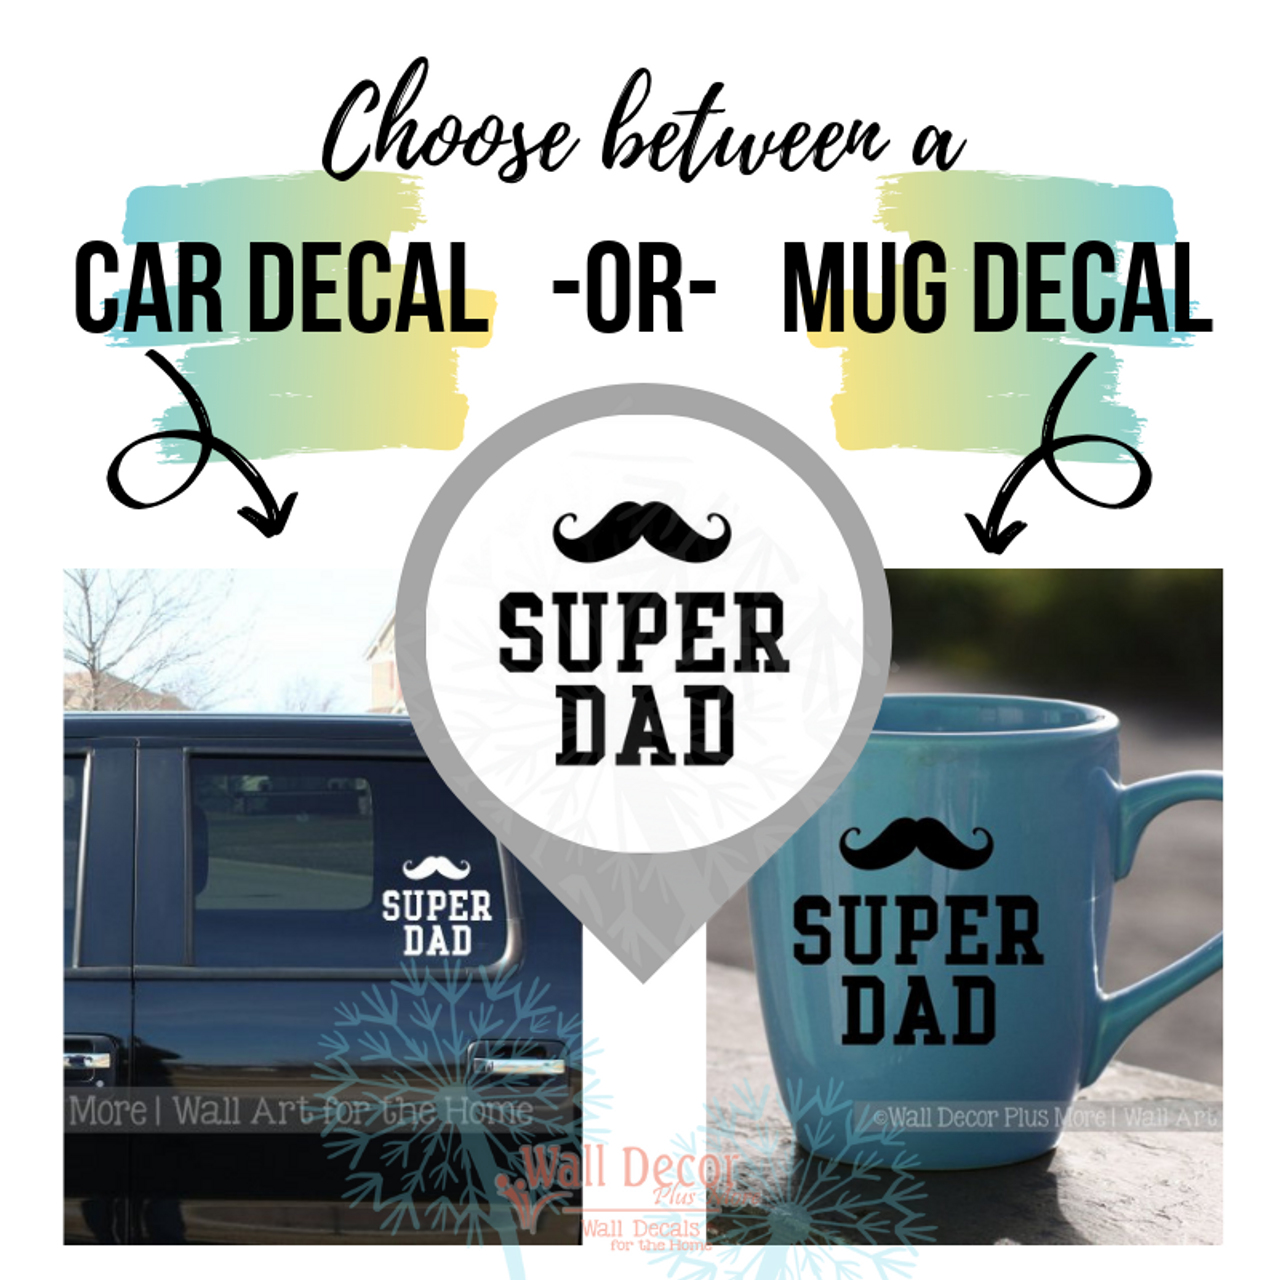 https://cdn11.bigcommerce.com/s-571px4/images/stencil/1280x1280/products/3030/15311/WD1538_Super_Dad_Choose_Your_tumbler_or_car_decal__79589.1573509683.png?c=2